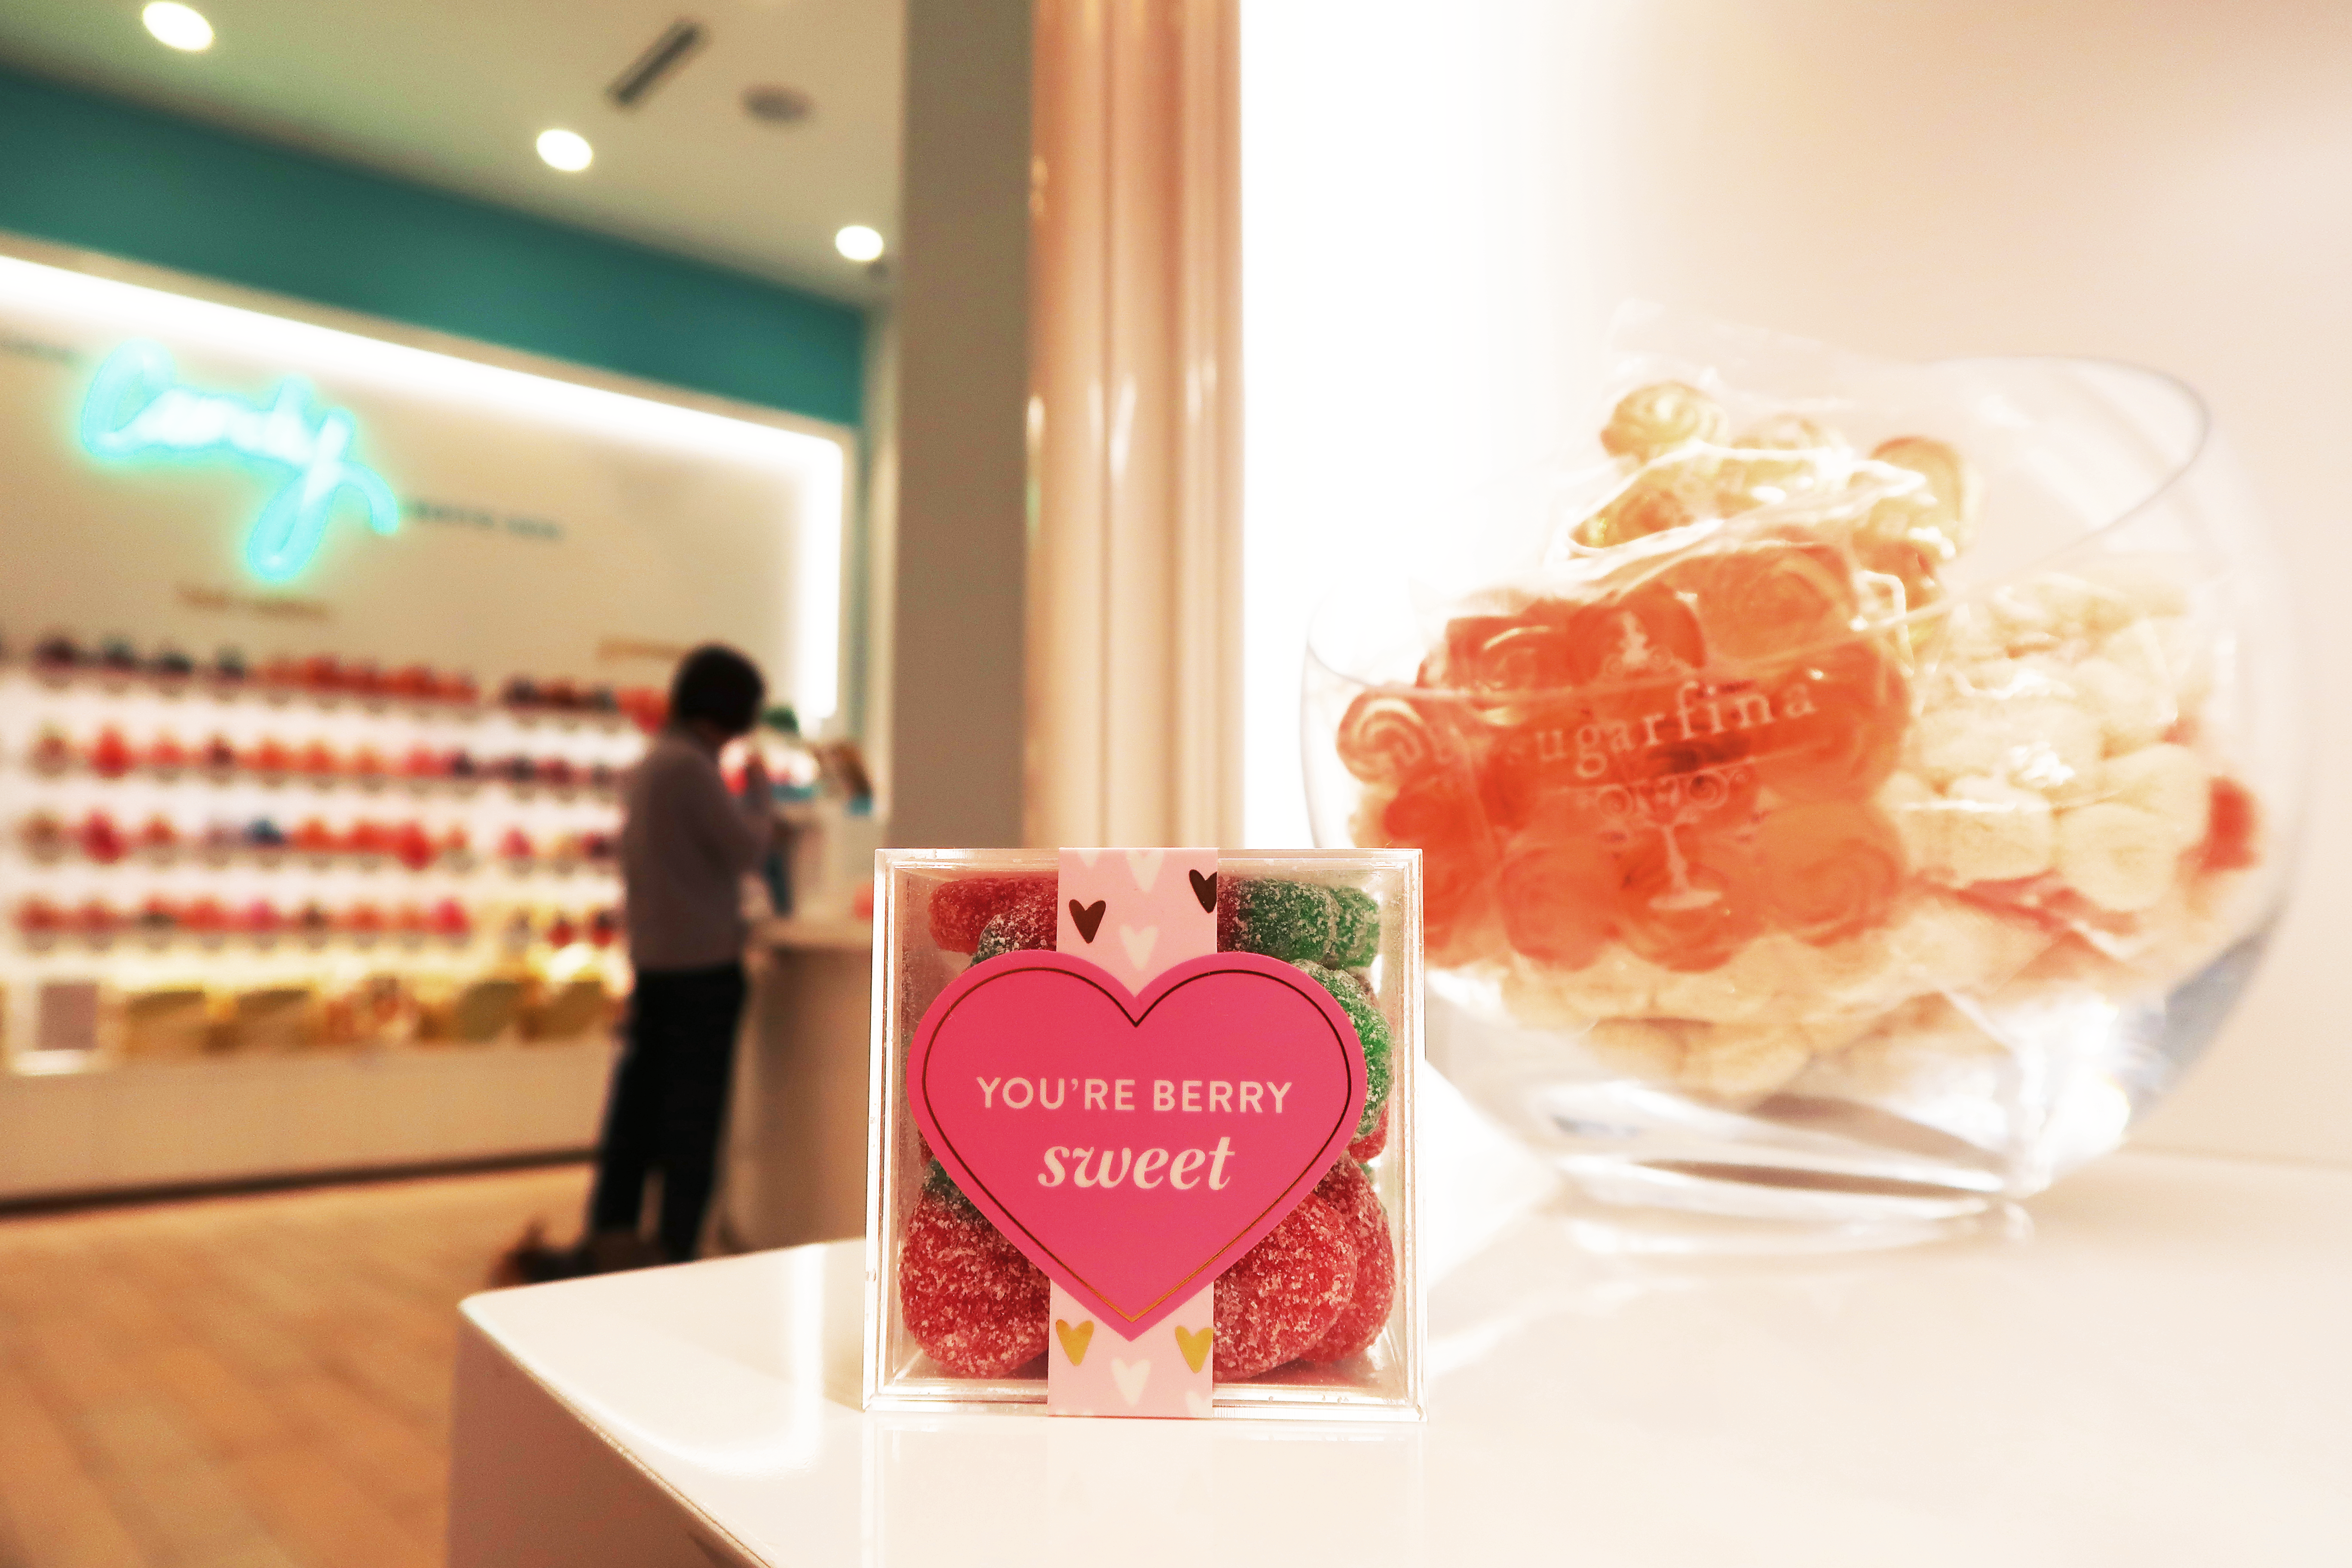 Sugarfina, Sweet Factory face off